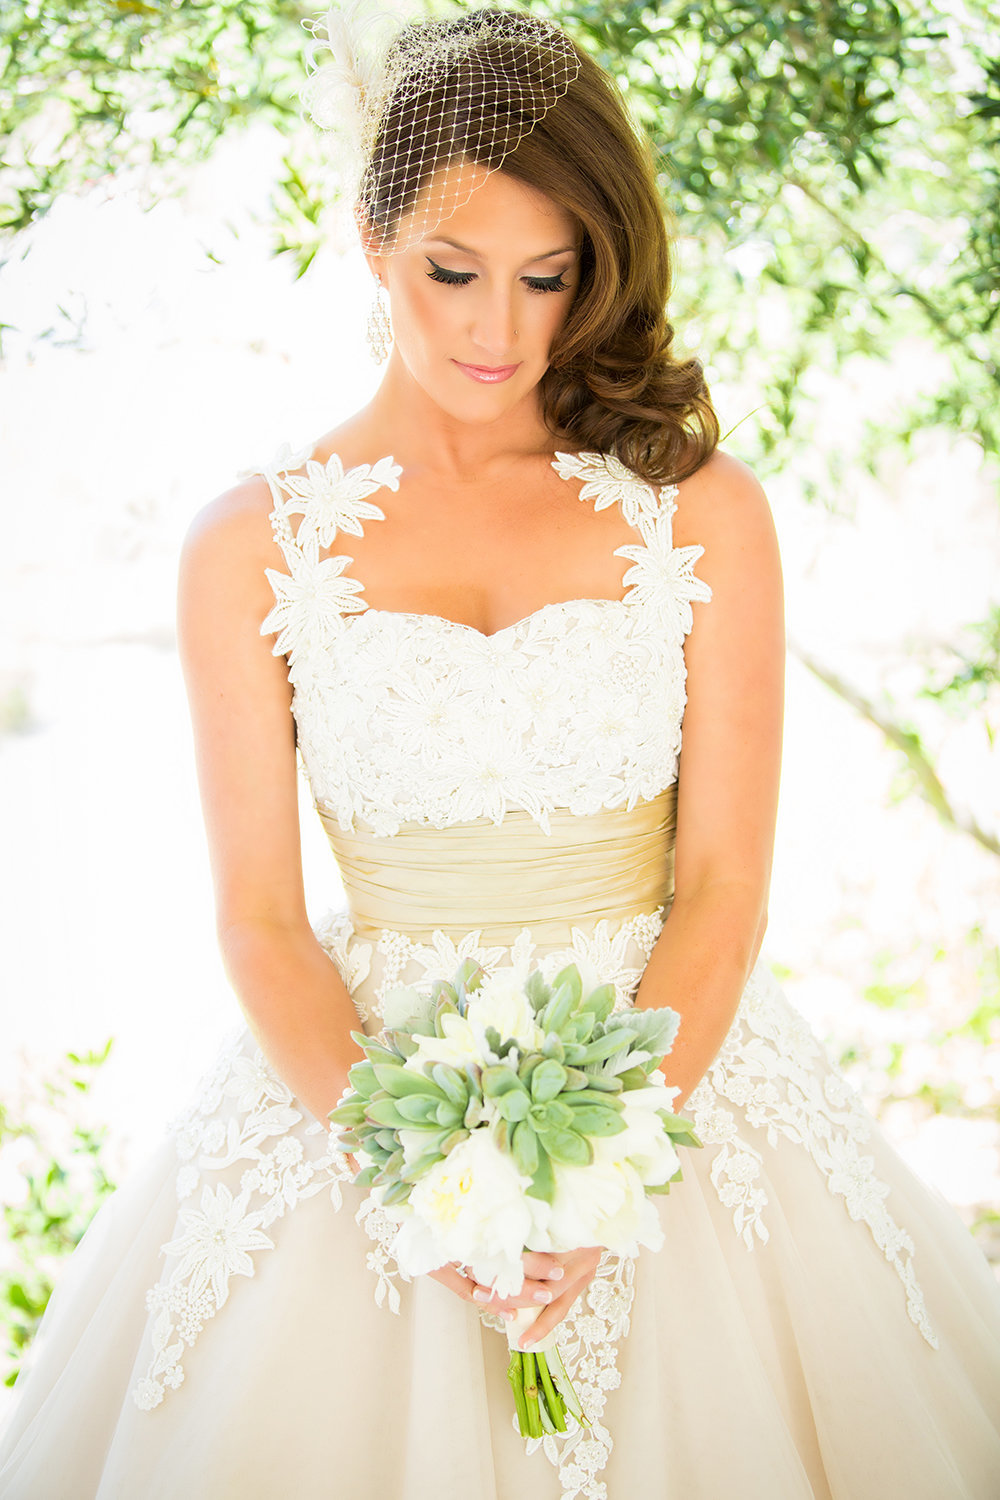 Grand Tradition wedding photos bride with beautiful bouquet